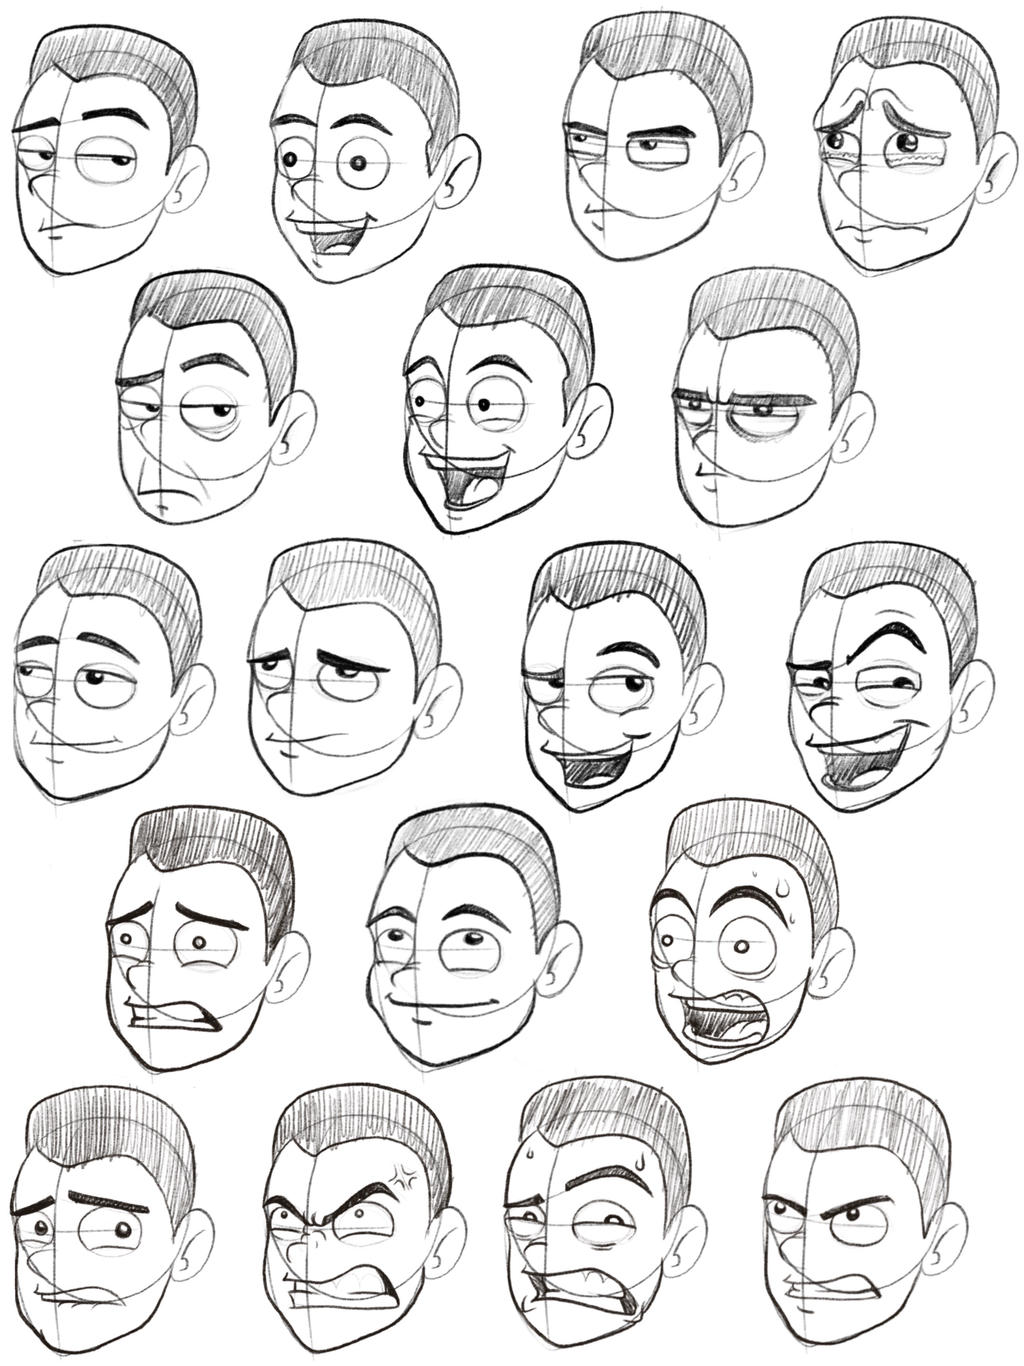 Character Design/ Facial Expressions! by stefanpavel on DeviantArt